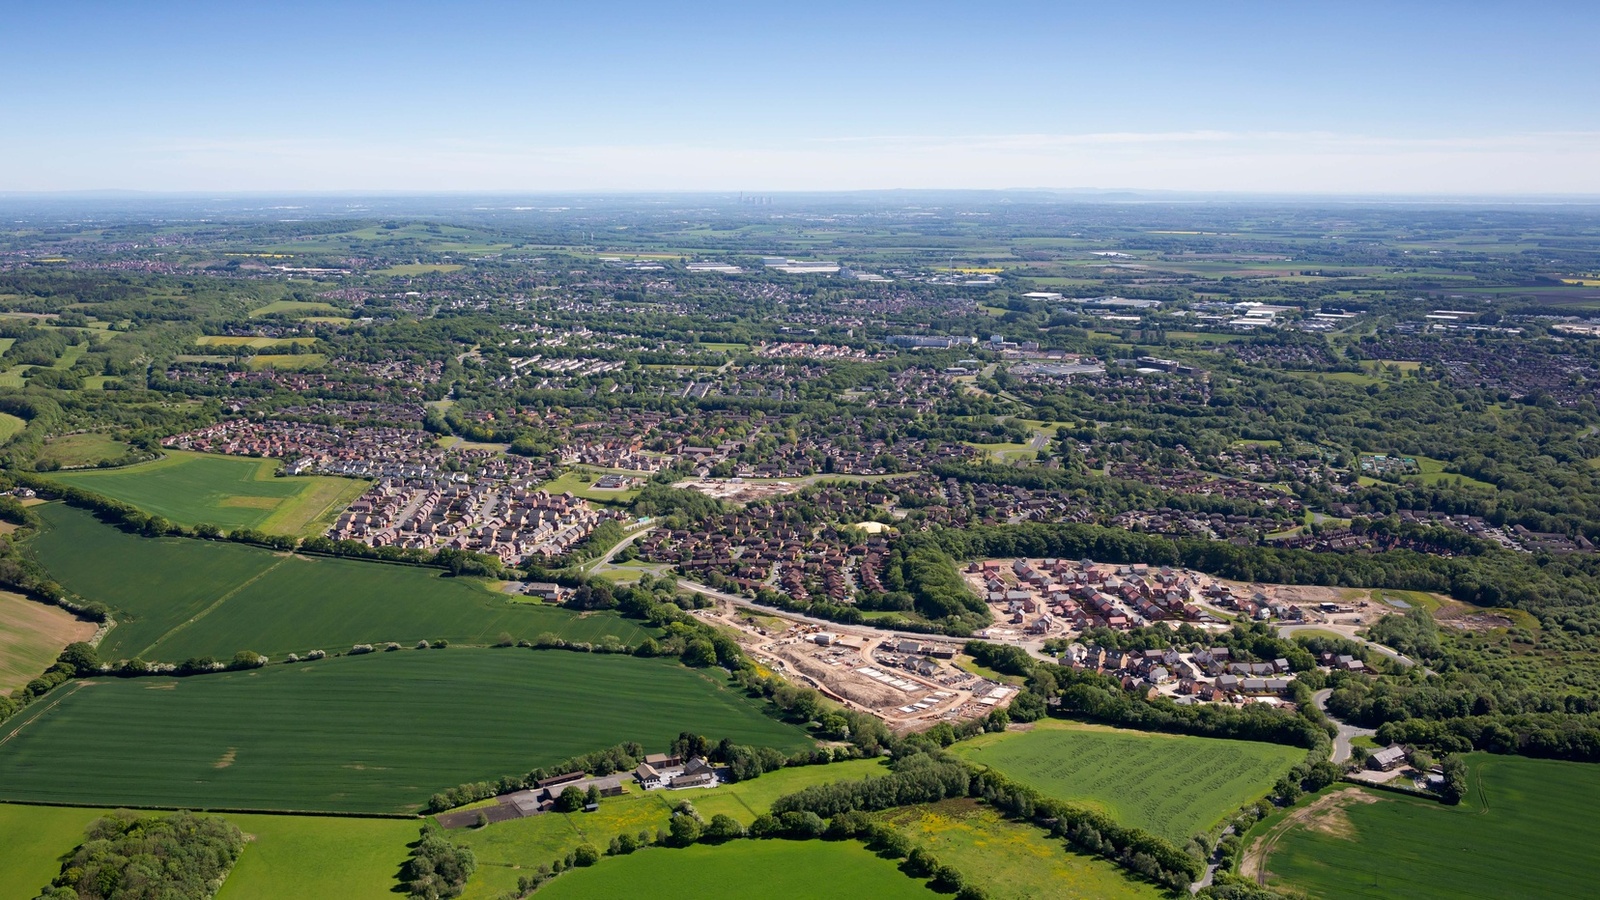 Skelmersdale Lancashre from the air